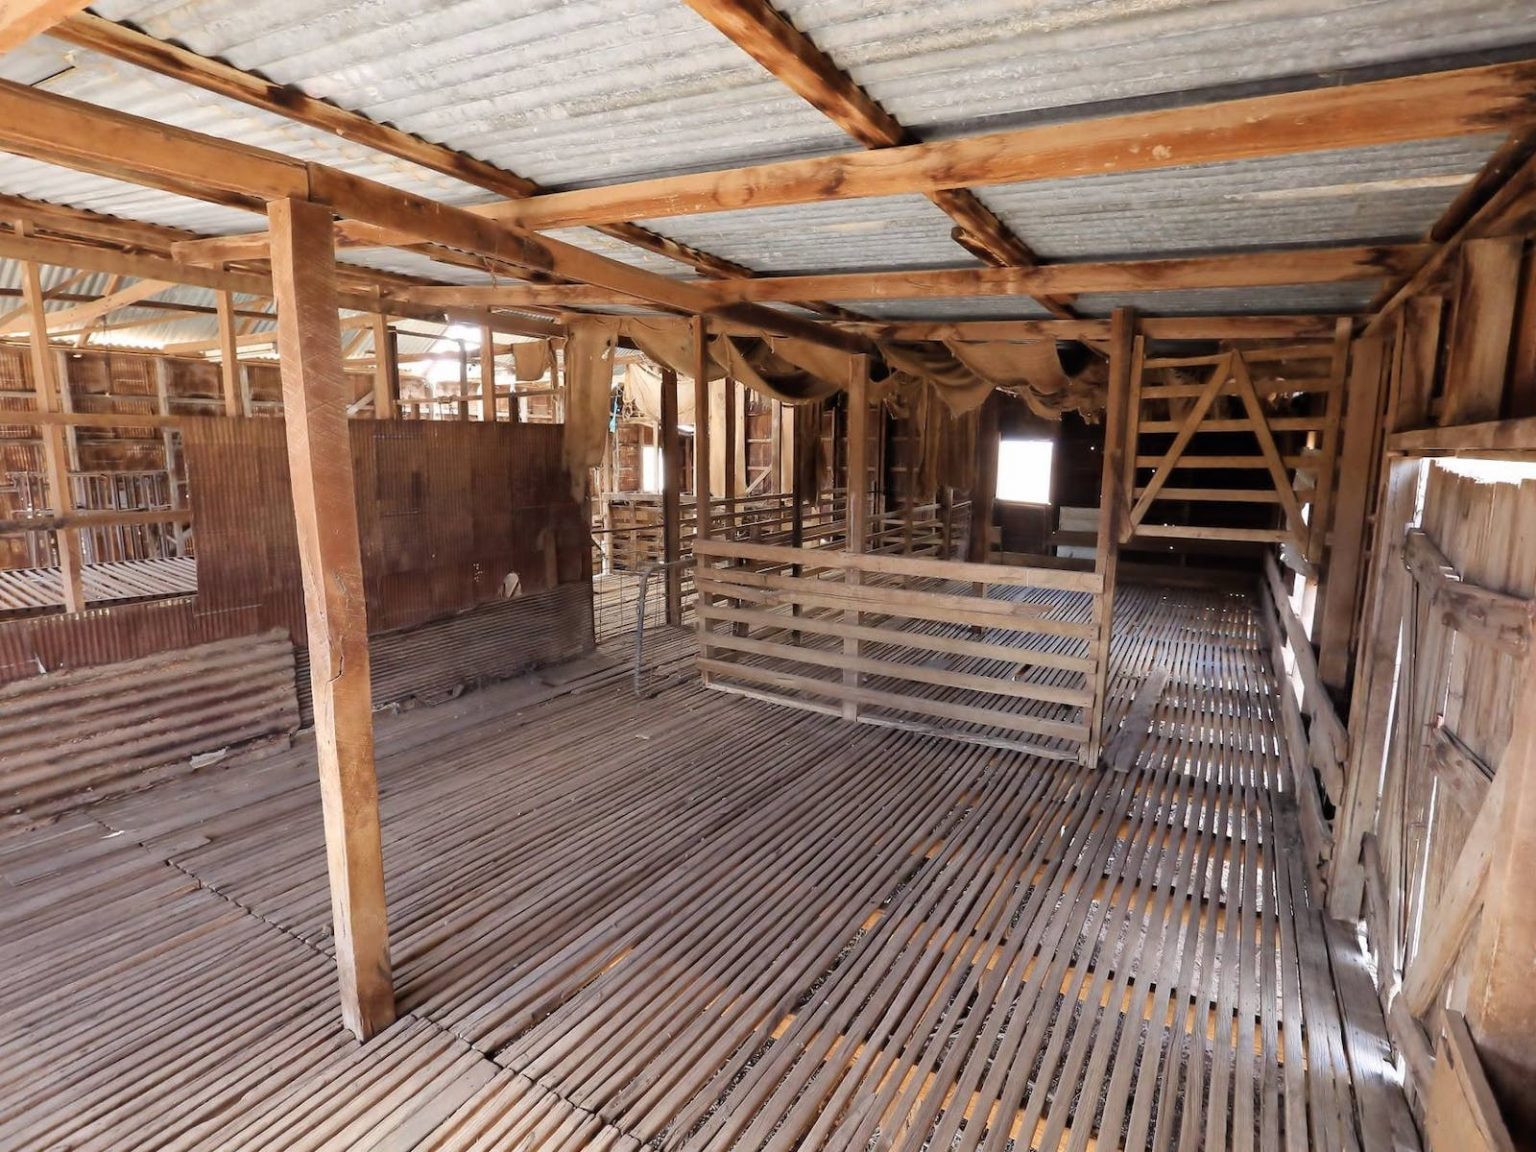 Inside the Shearing Shed